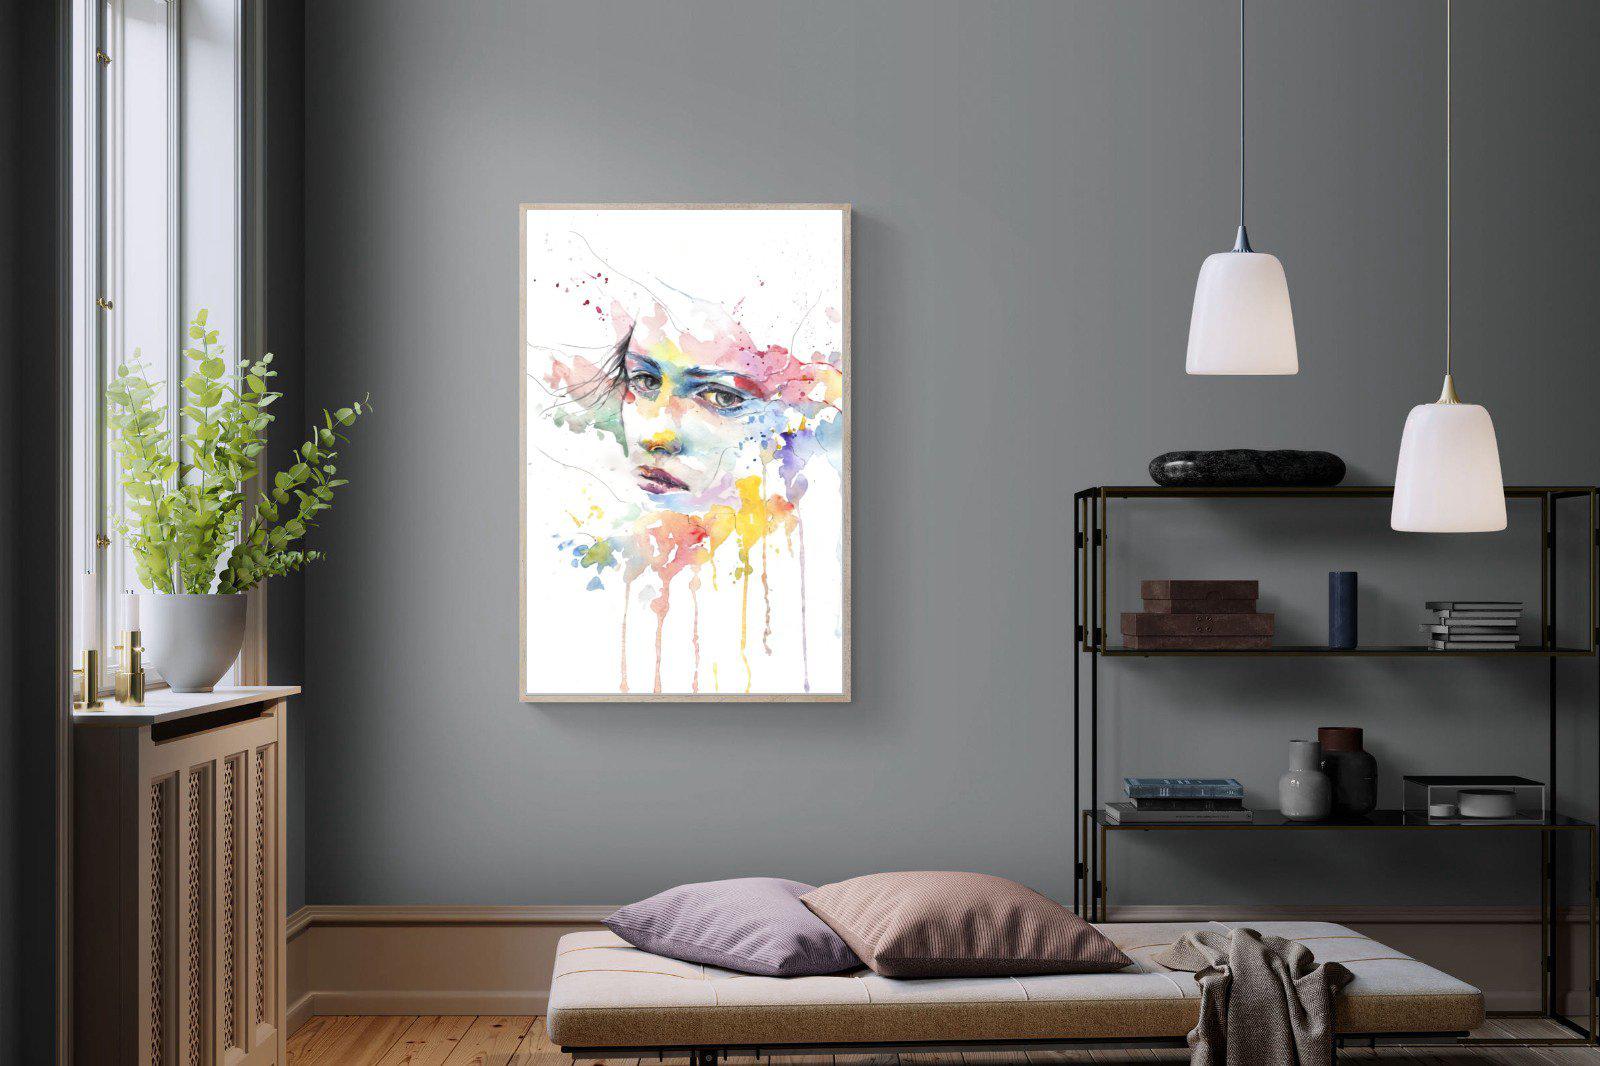 Deep in Thought-Wall_Art-100 x 150cm-Mounted Canvas-Wood-Pixalot